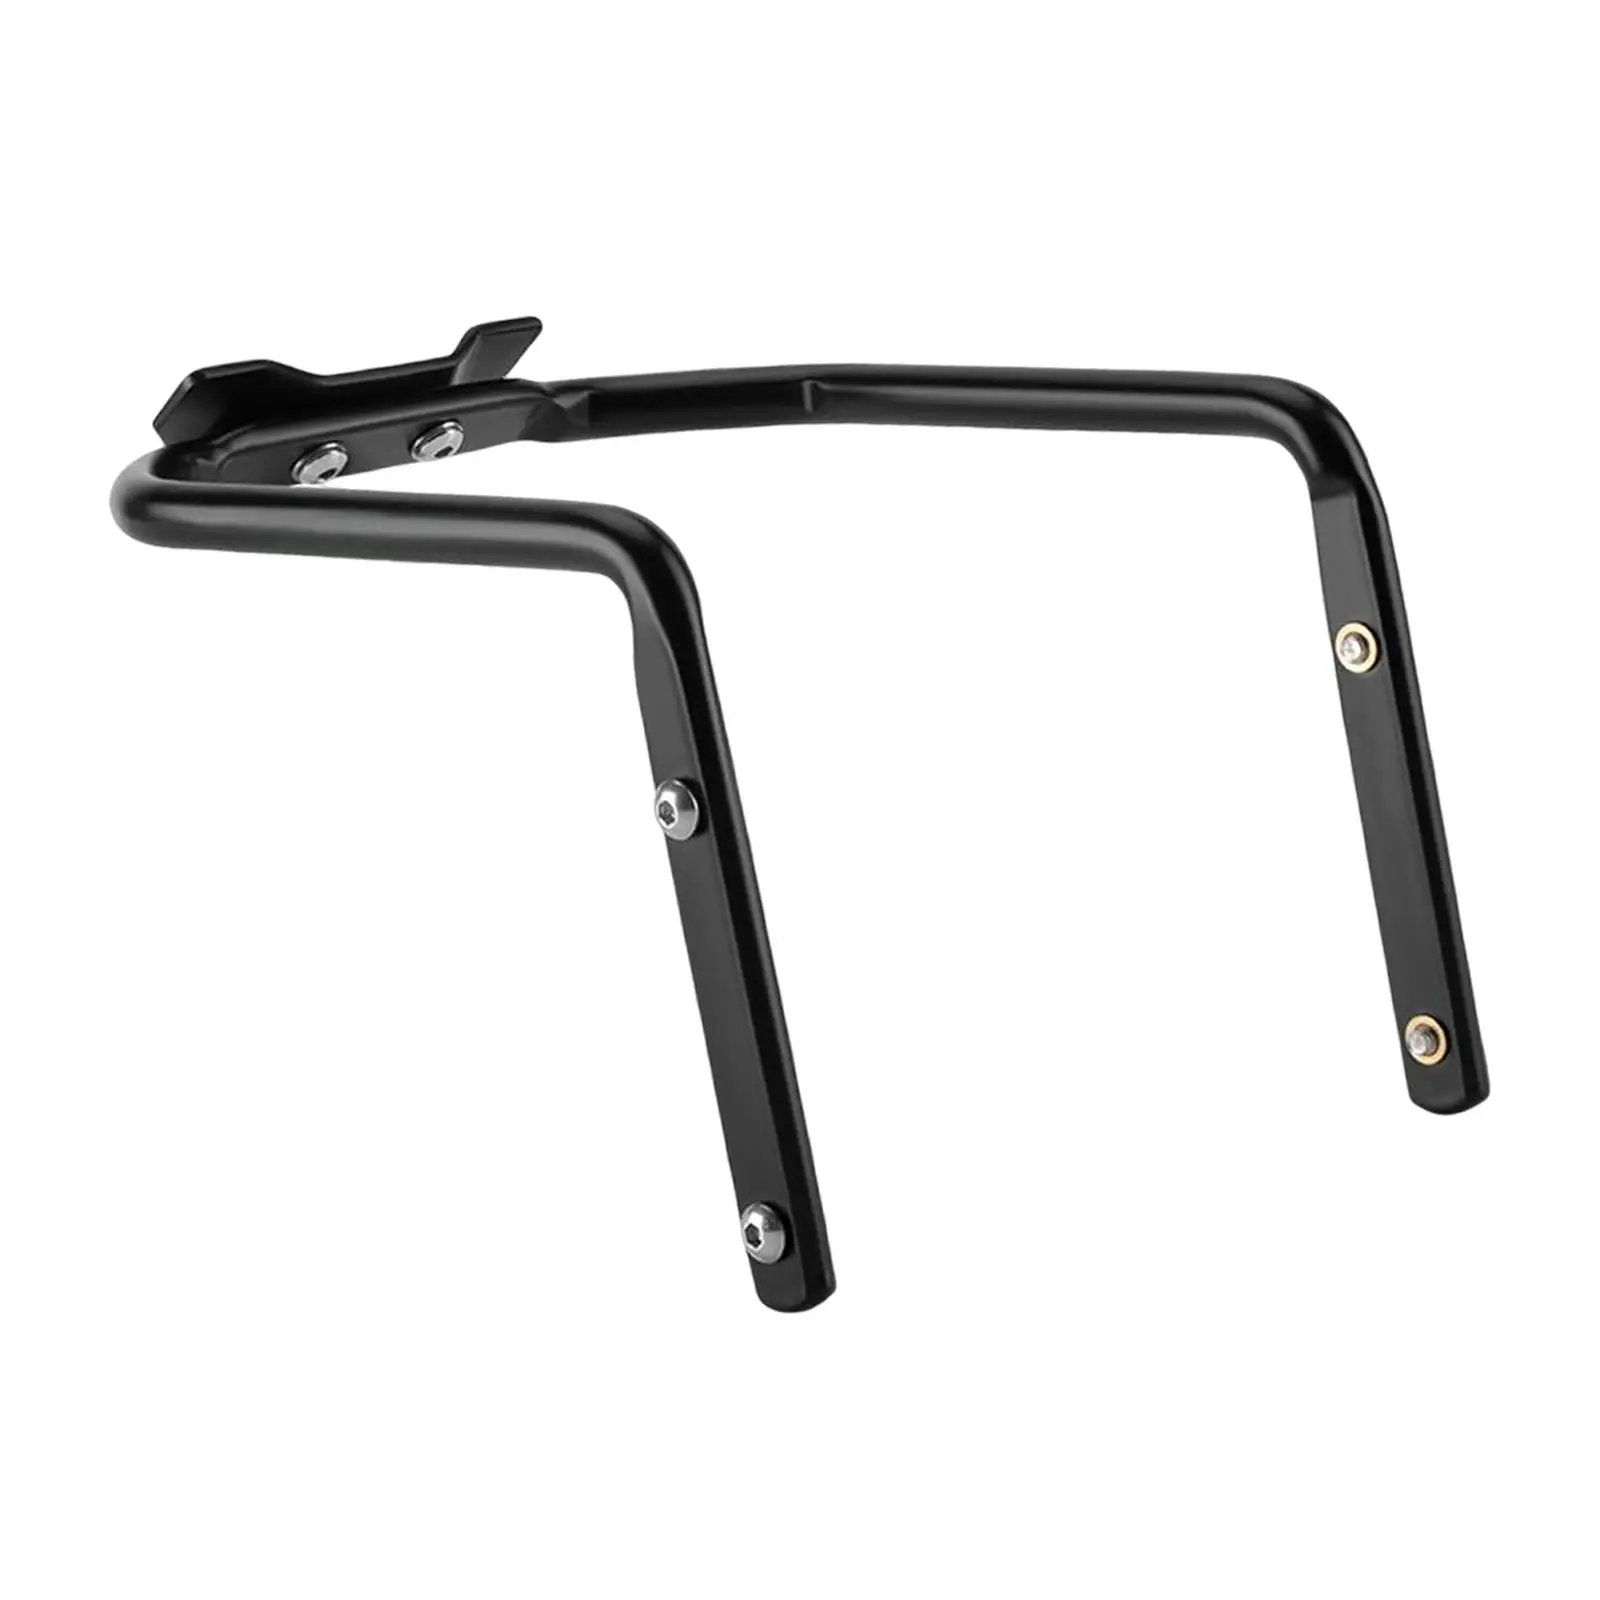 Bicycle Tail Bag Stabilizer Conversion Bracket Rear Rack for Road Bike